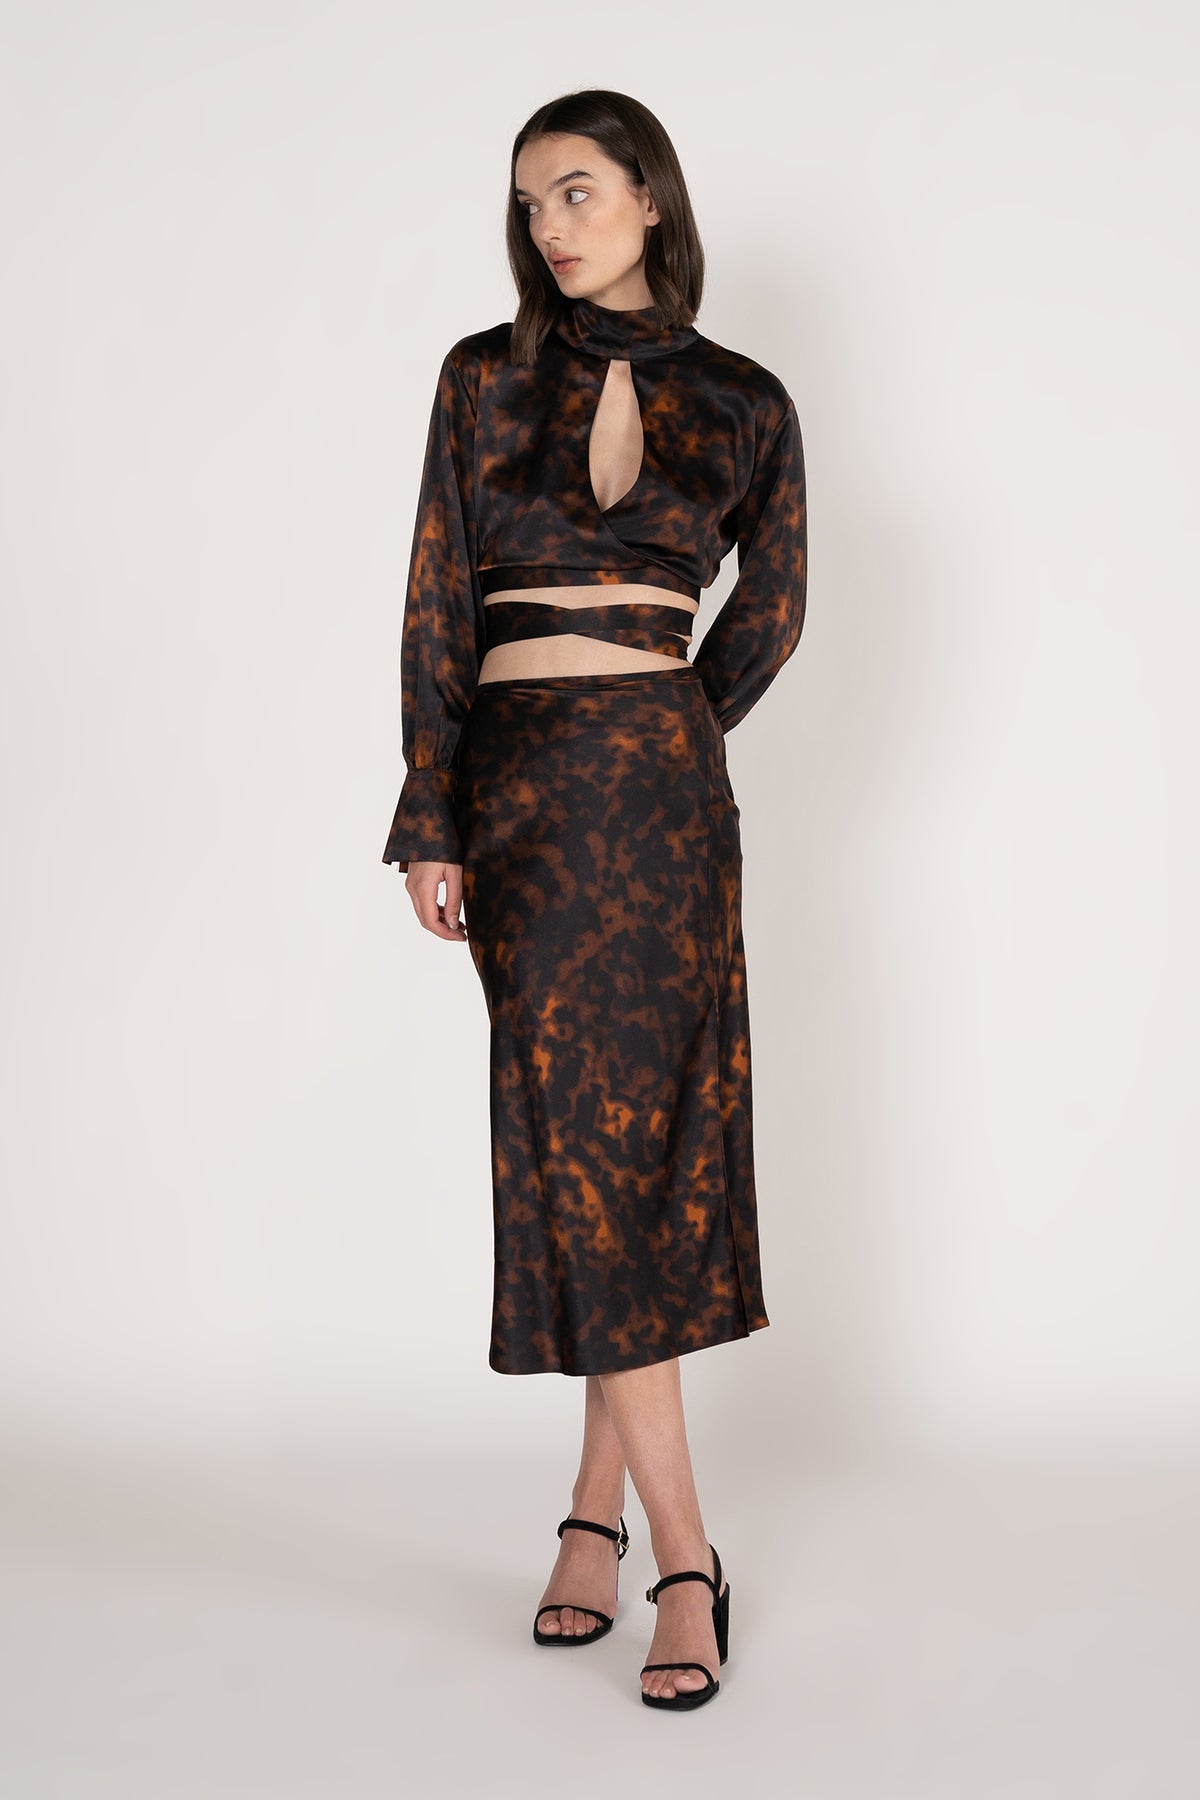 GINIA Thea Slim Line Skirt in Ember